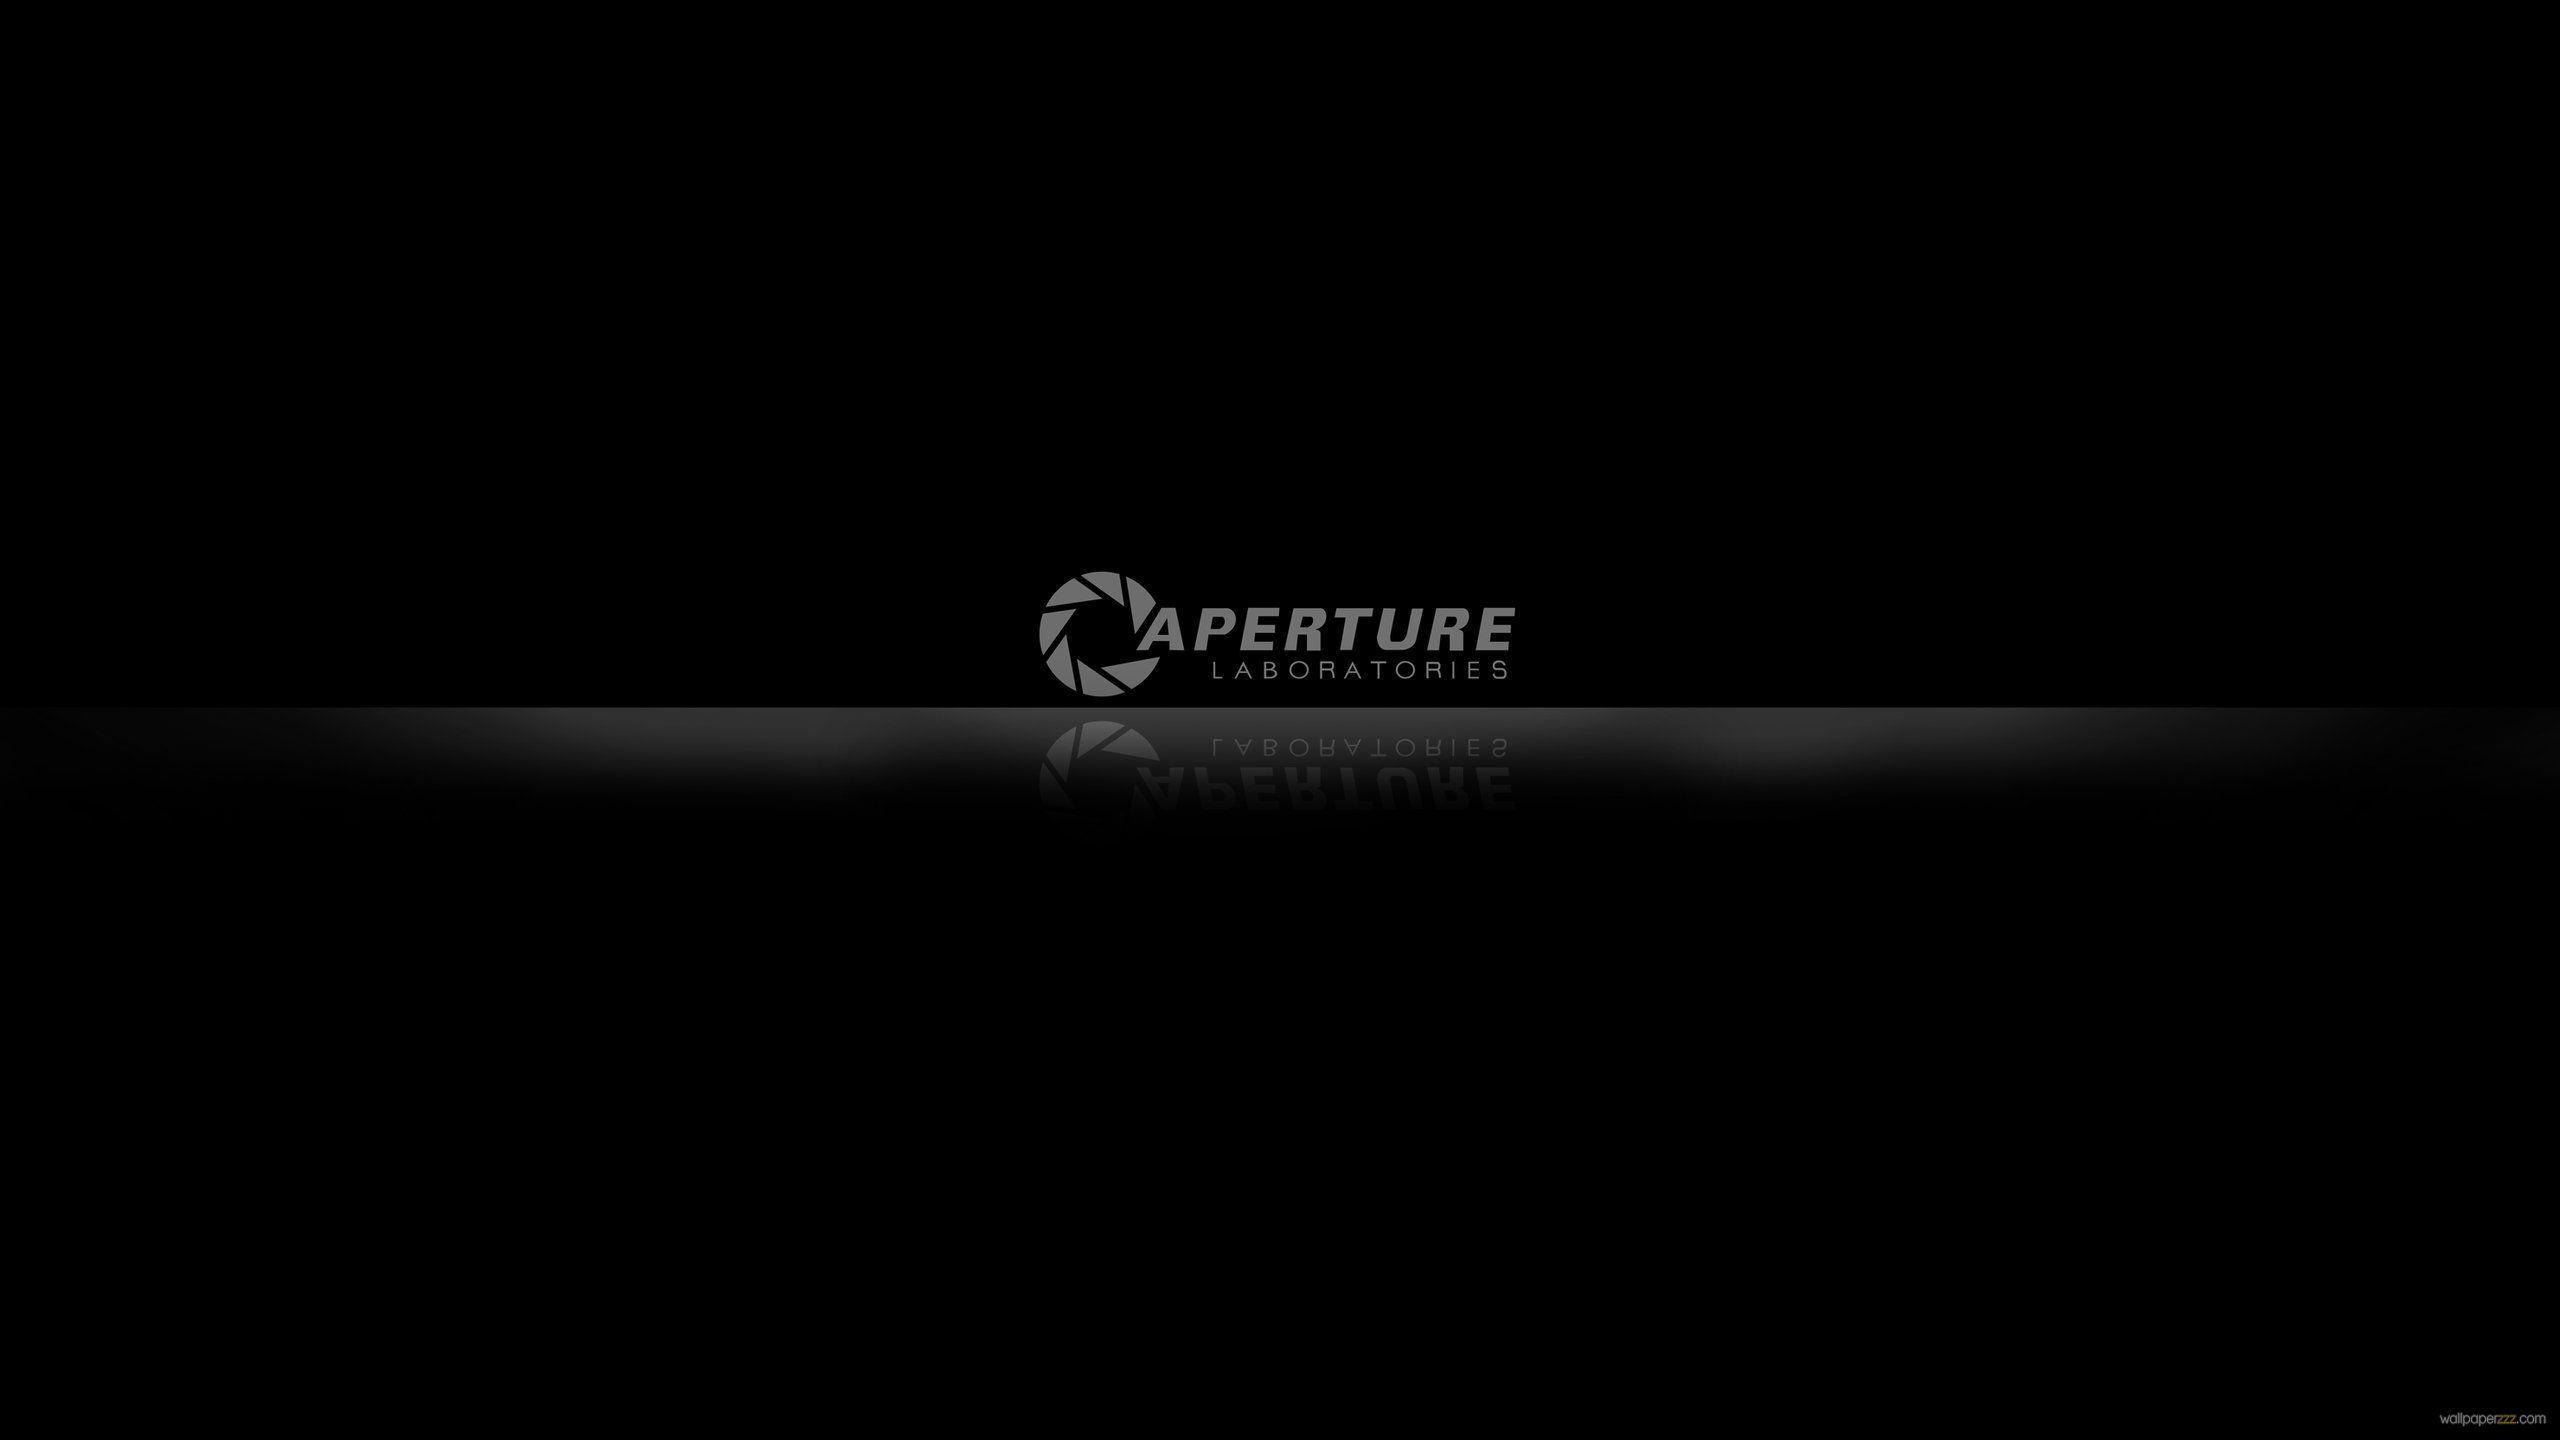 Glossy surface wallpaper logo aperture anonymous